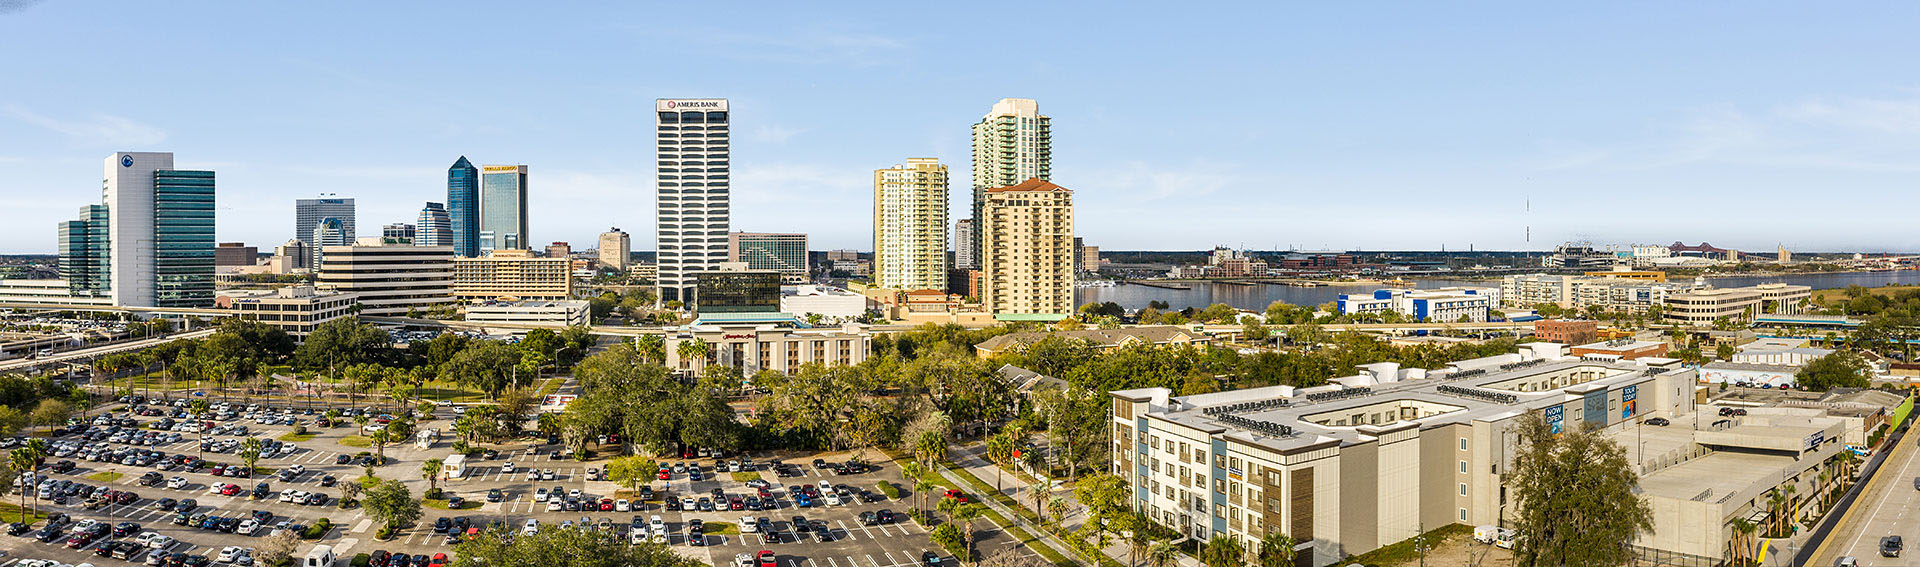 view of Southbank Downtown Jacksonville with SoBa Apartments in the foreground